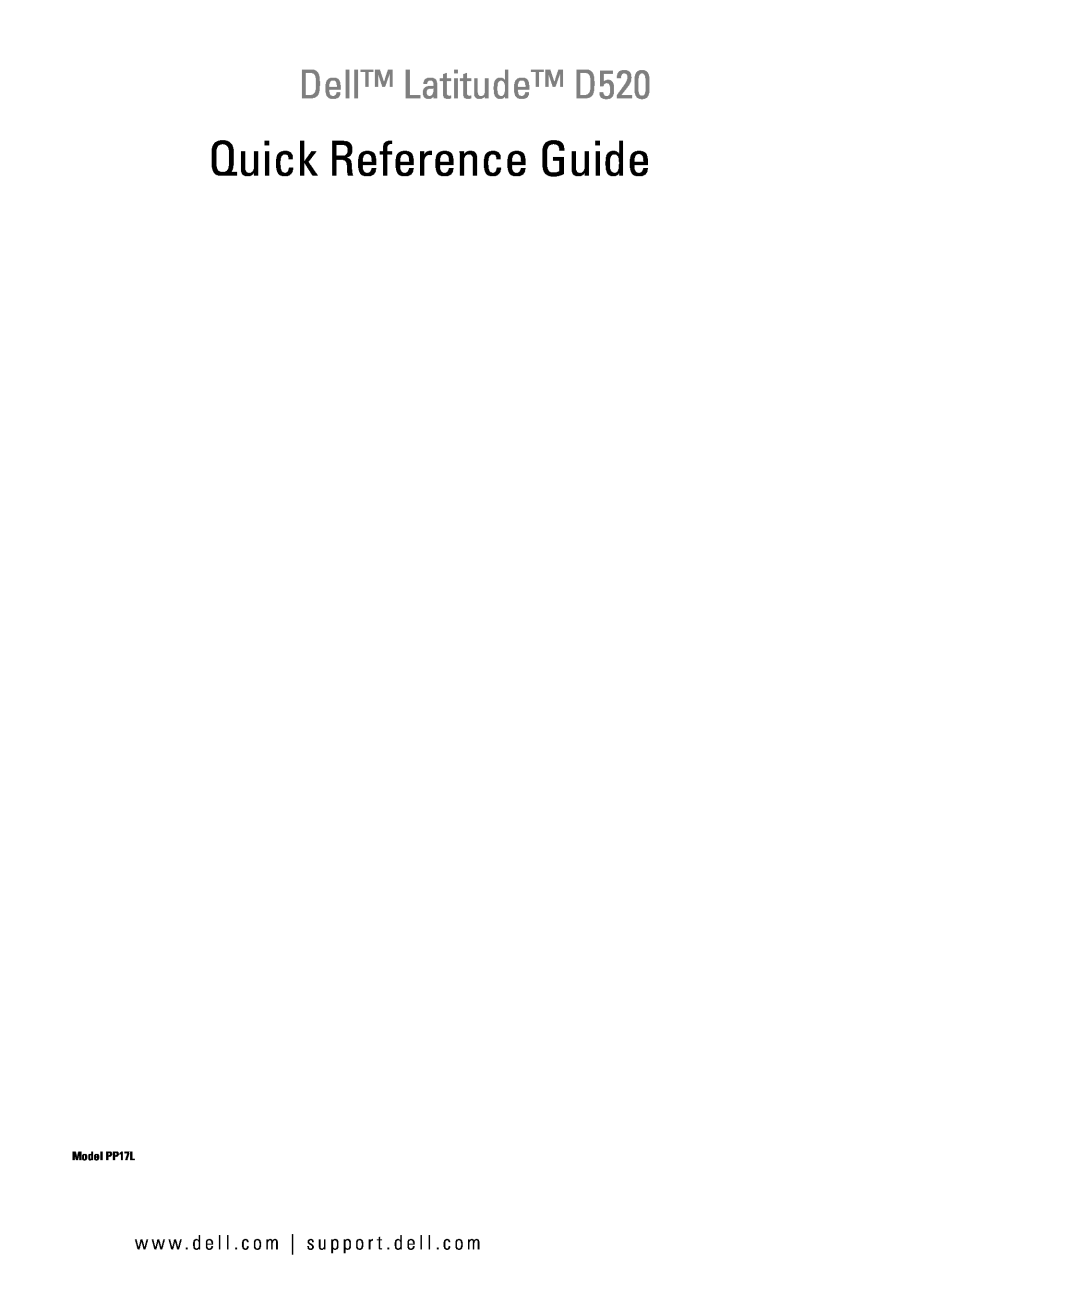 Dell JF854 manual Quick Reference Guide, Dell Latitude D520, Model PP17L 